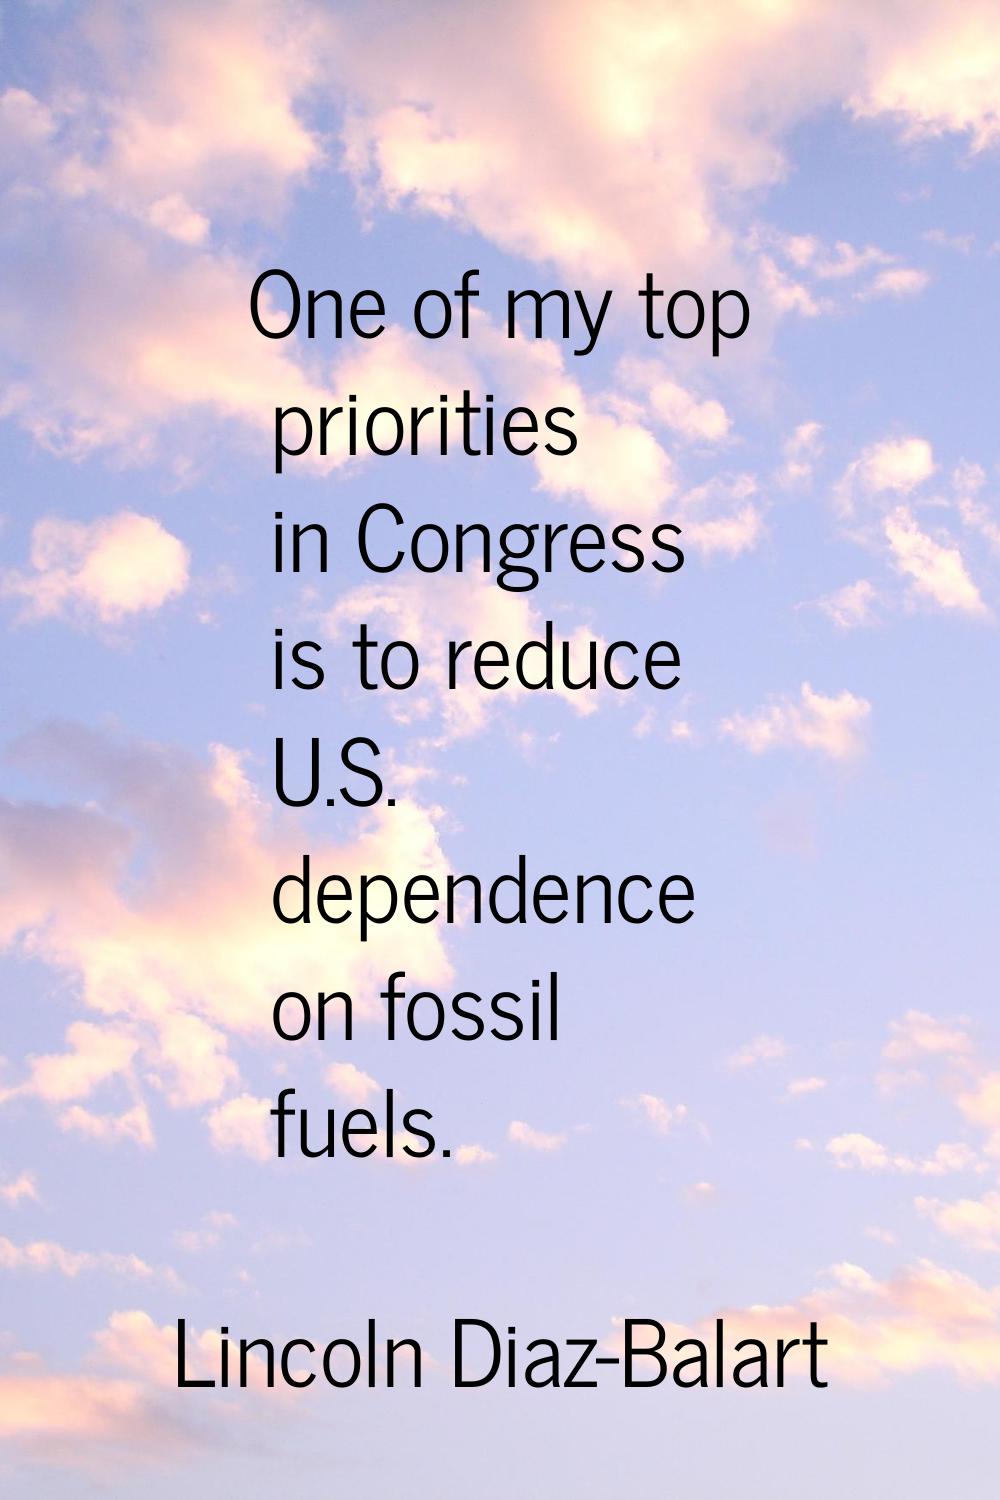 One of my top priorities in Congress is to reduce U.S. dependence on fossil fuels.